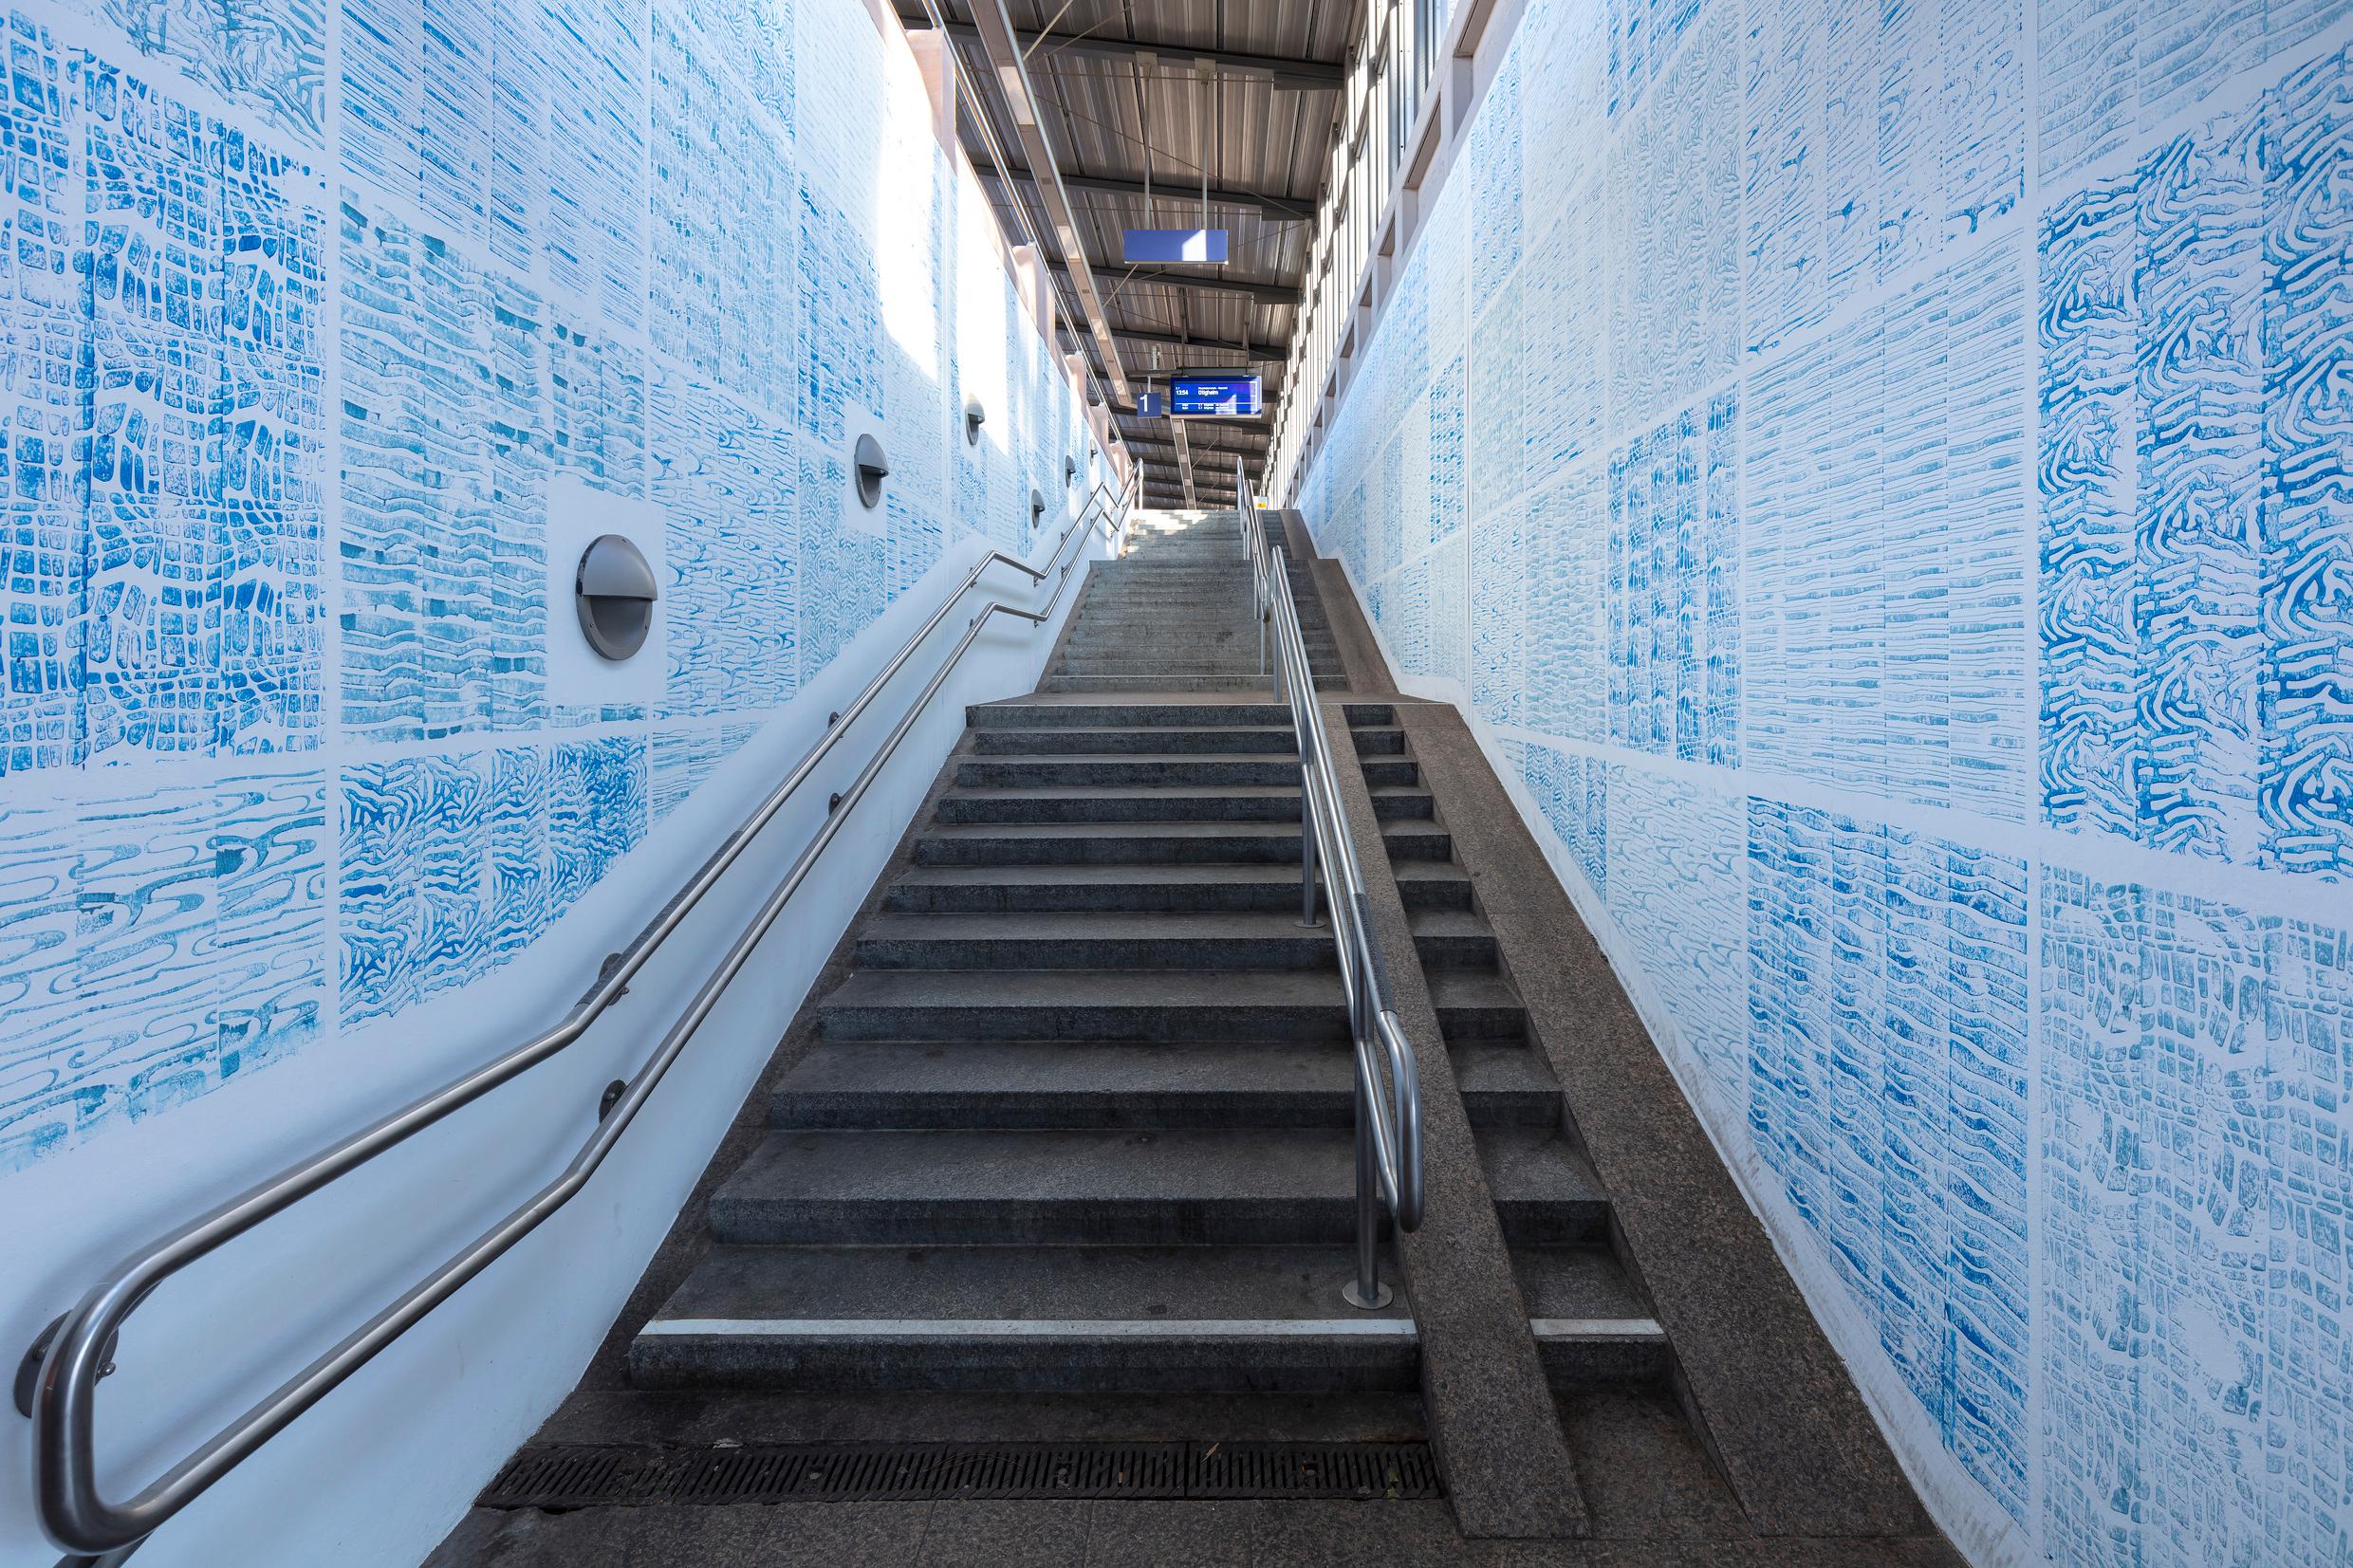 Platform entrance with blue mosaic on the walls